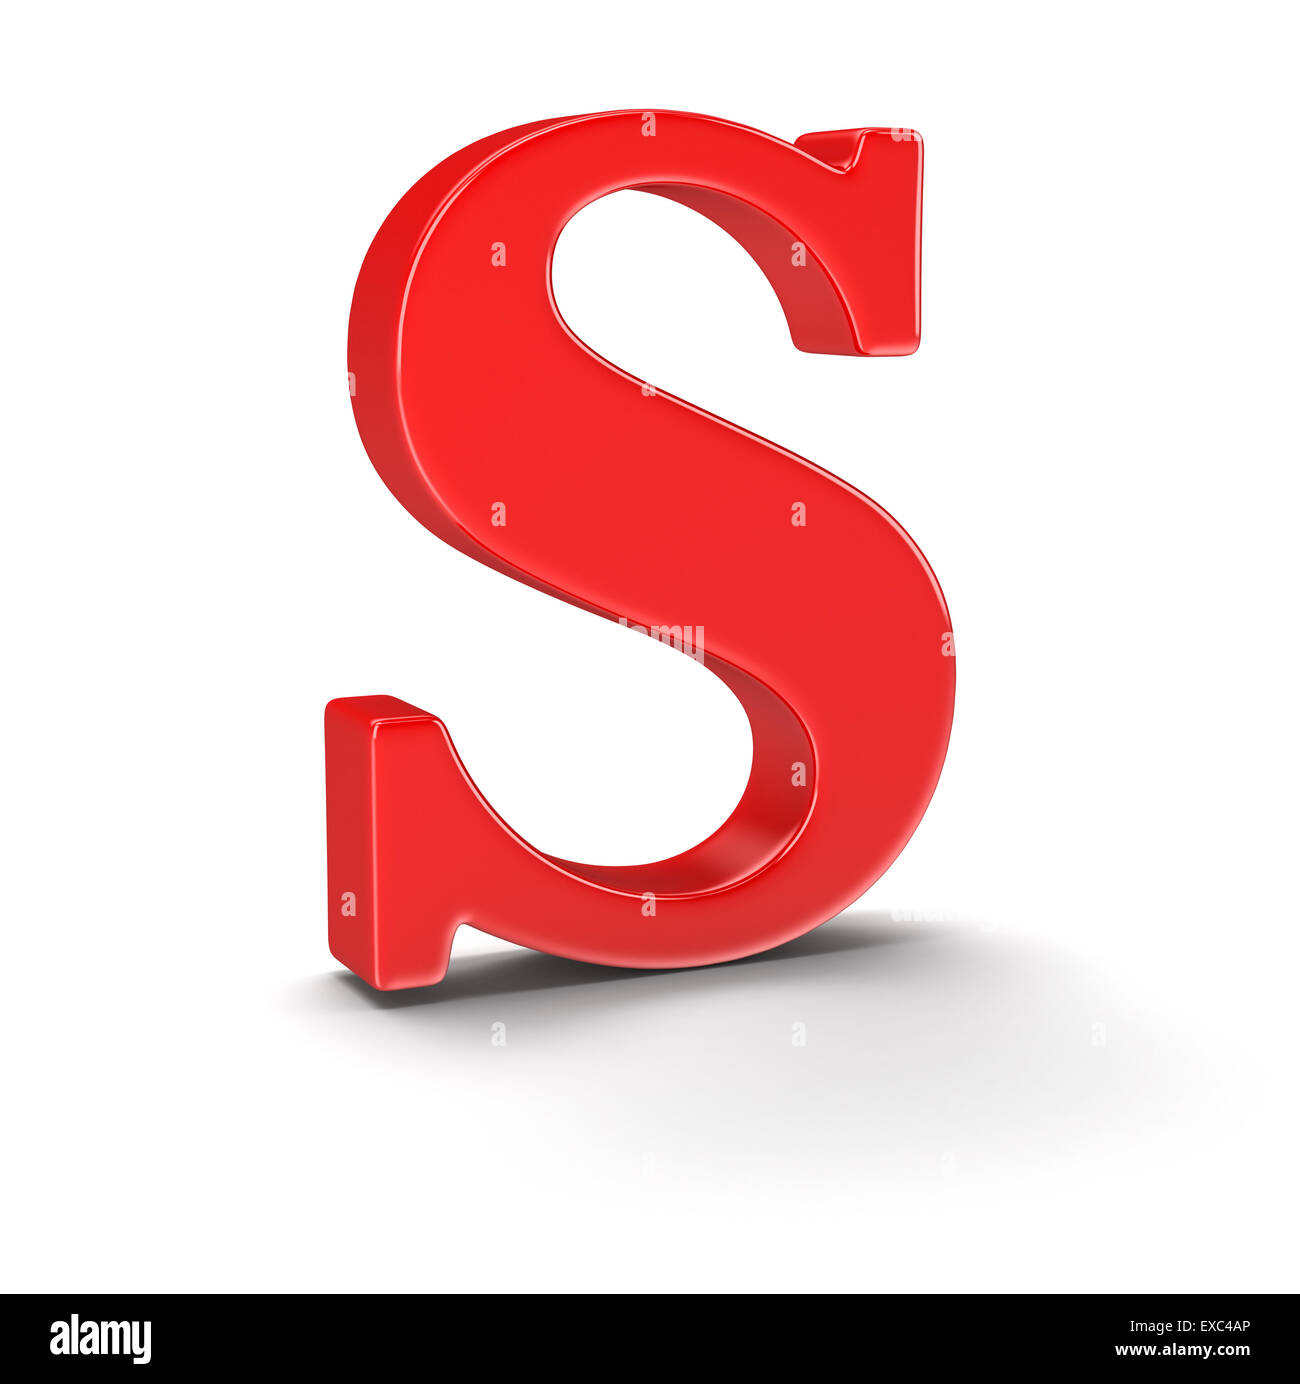 Letter S (clipping path included Stock Photo - Alamy